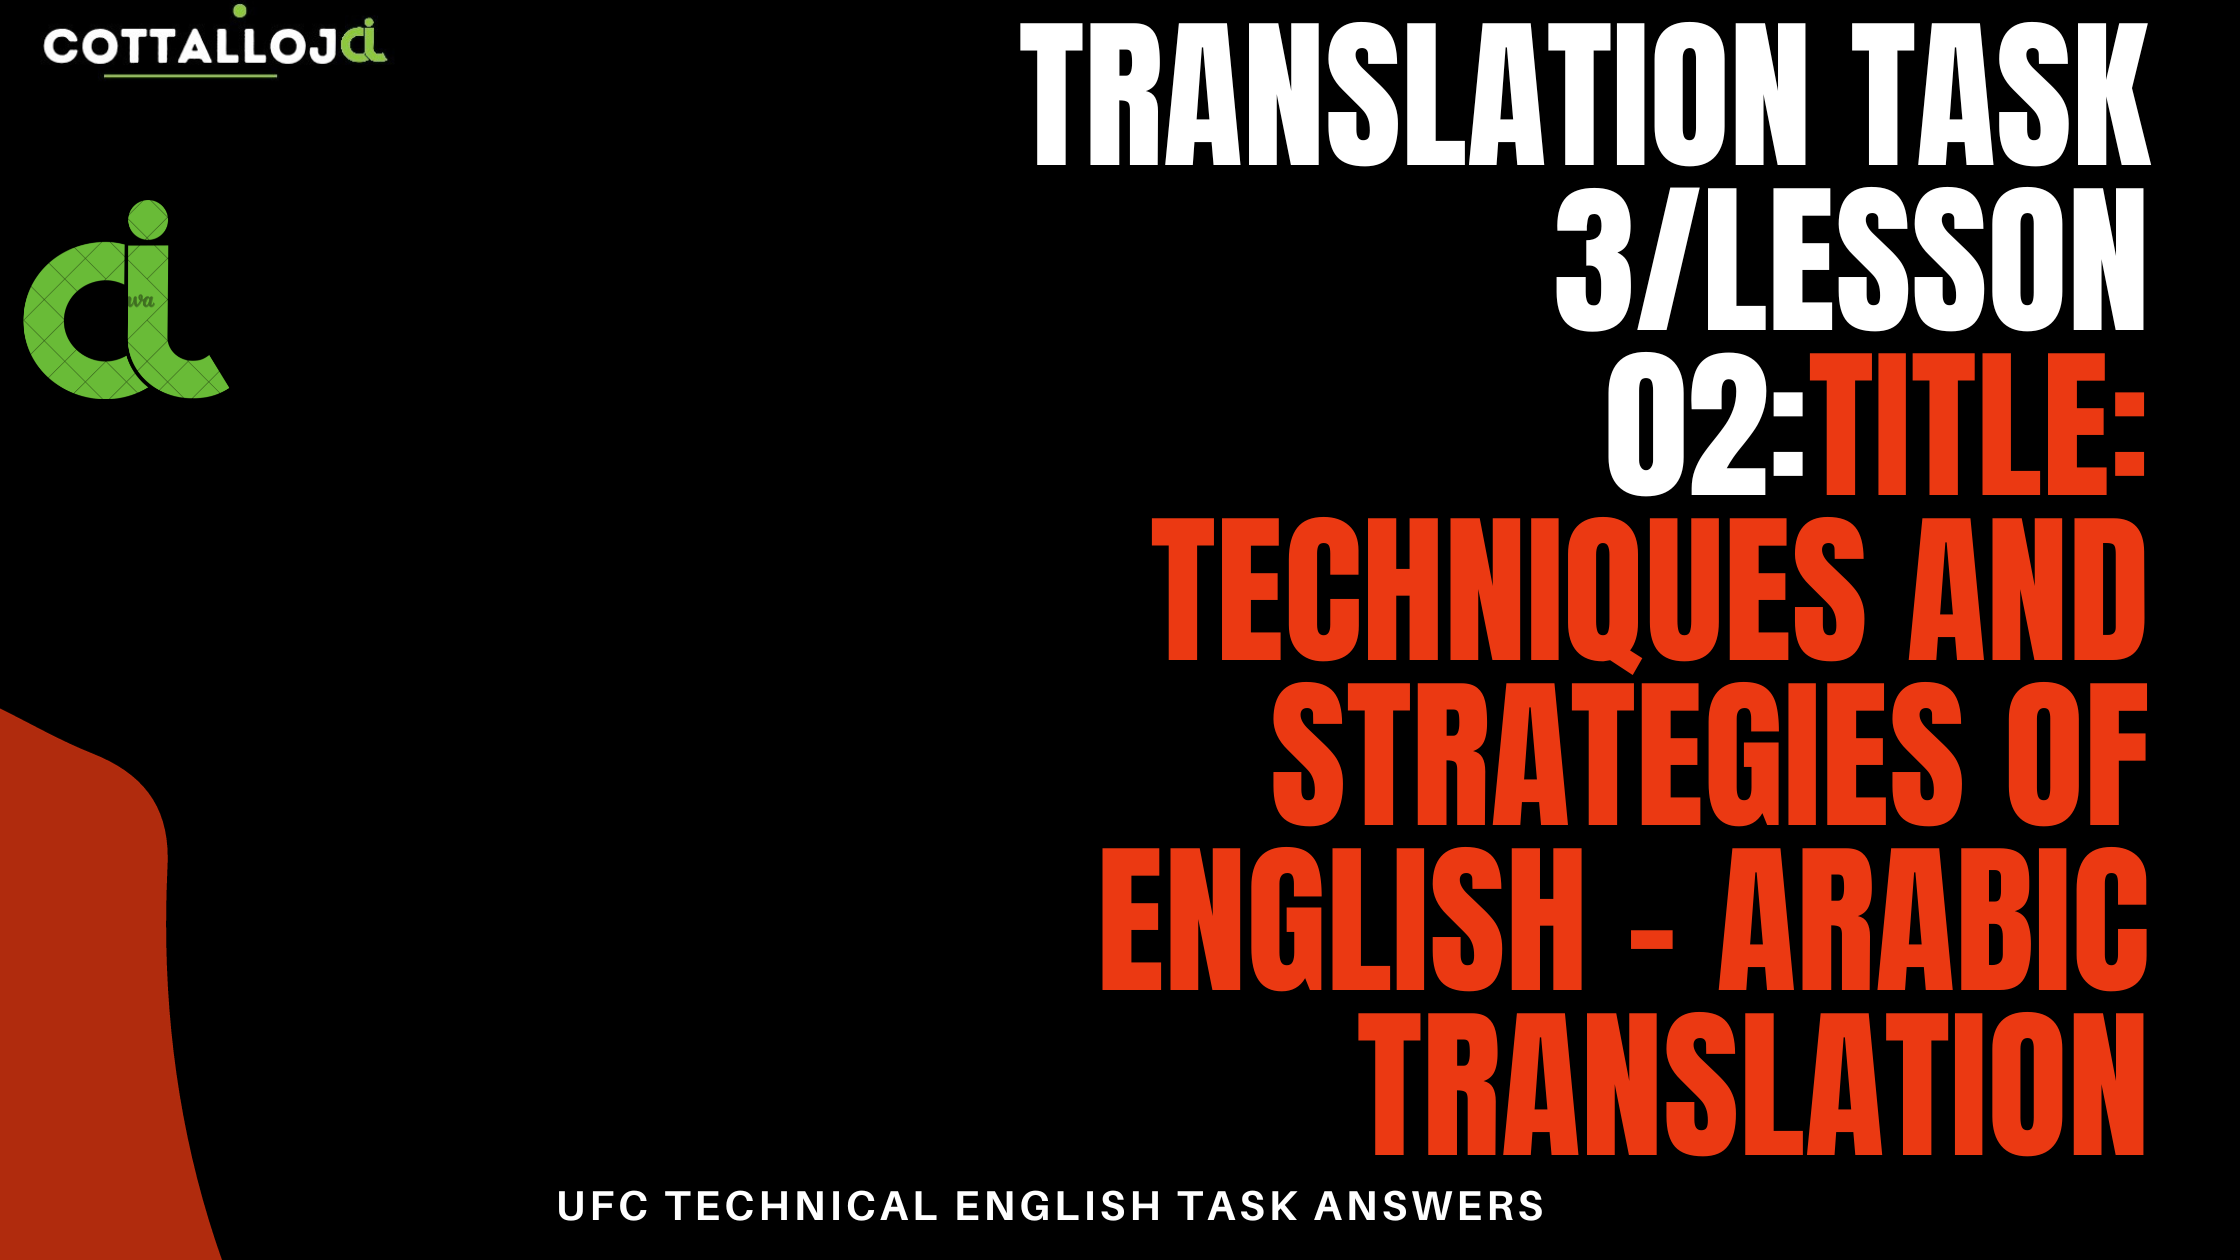 Translation Task 3/lesson 02: Title: Techniques and Strategies of English - Arabic Translation